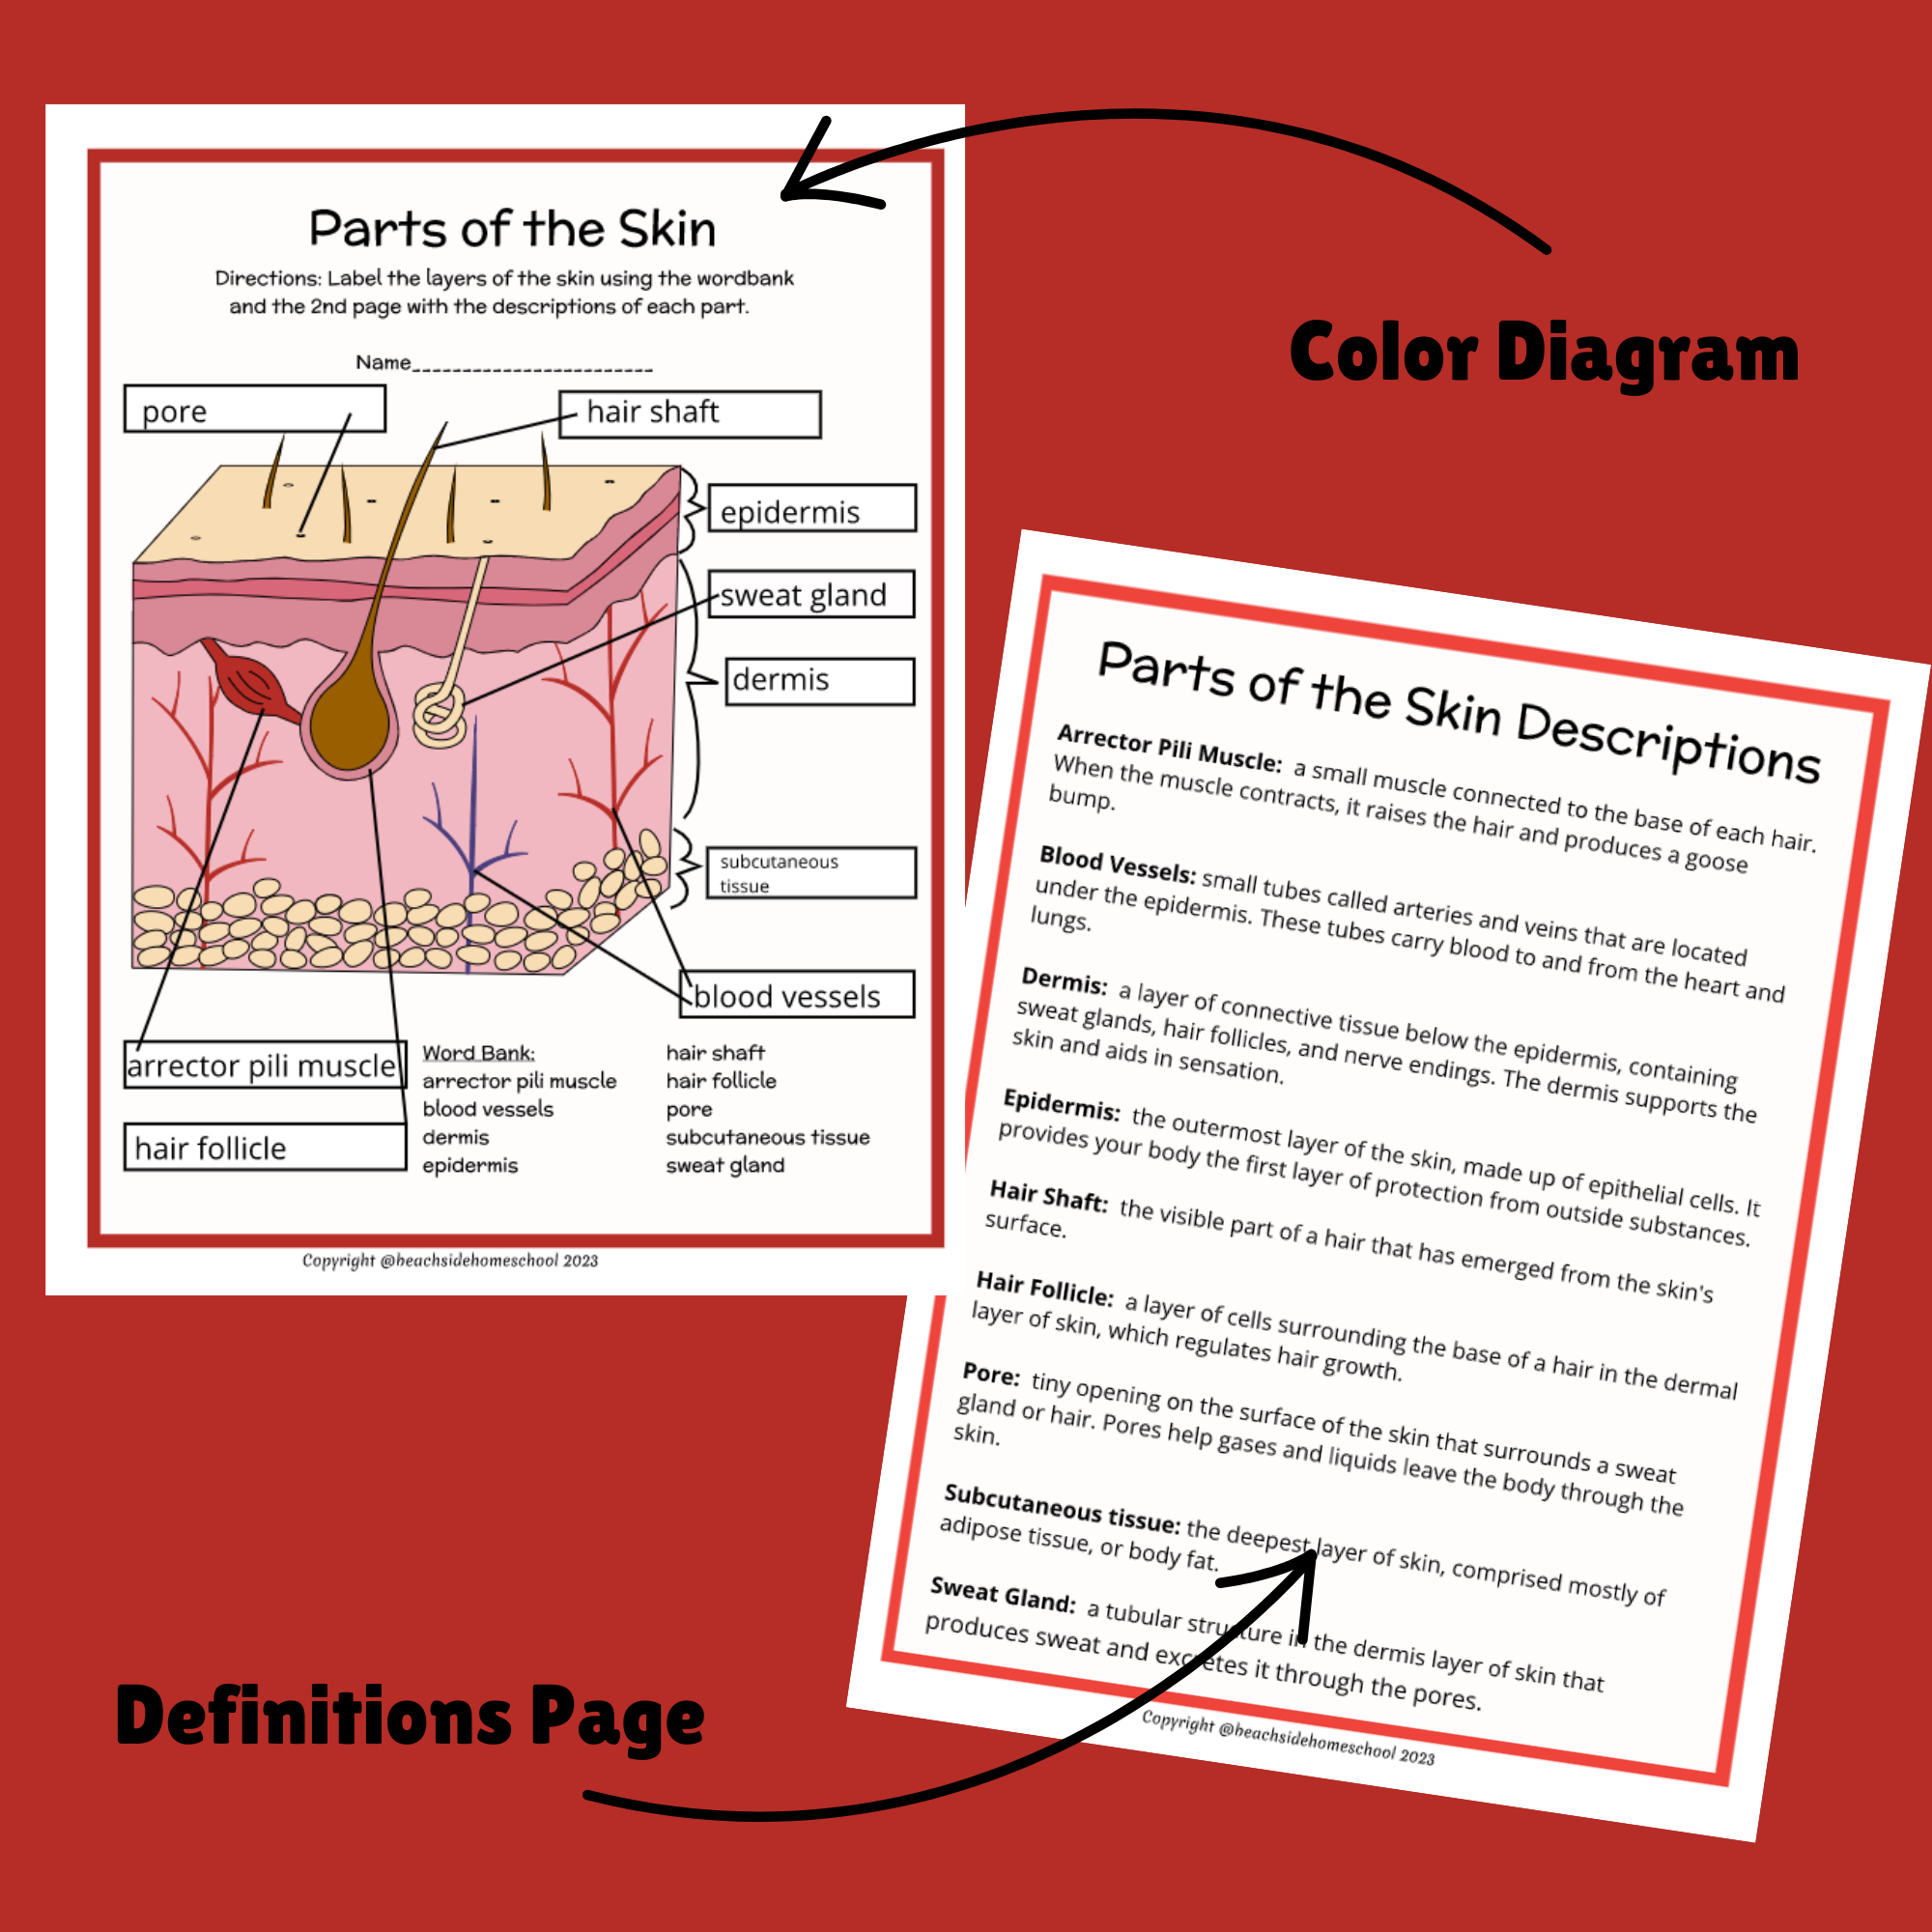 Skin layers parts labeling diagram